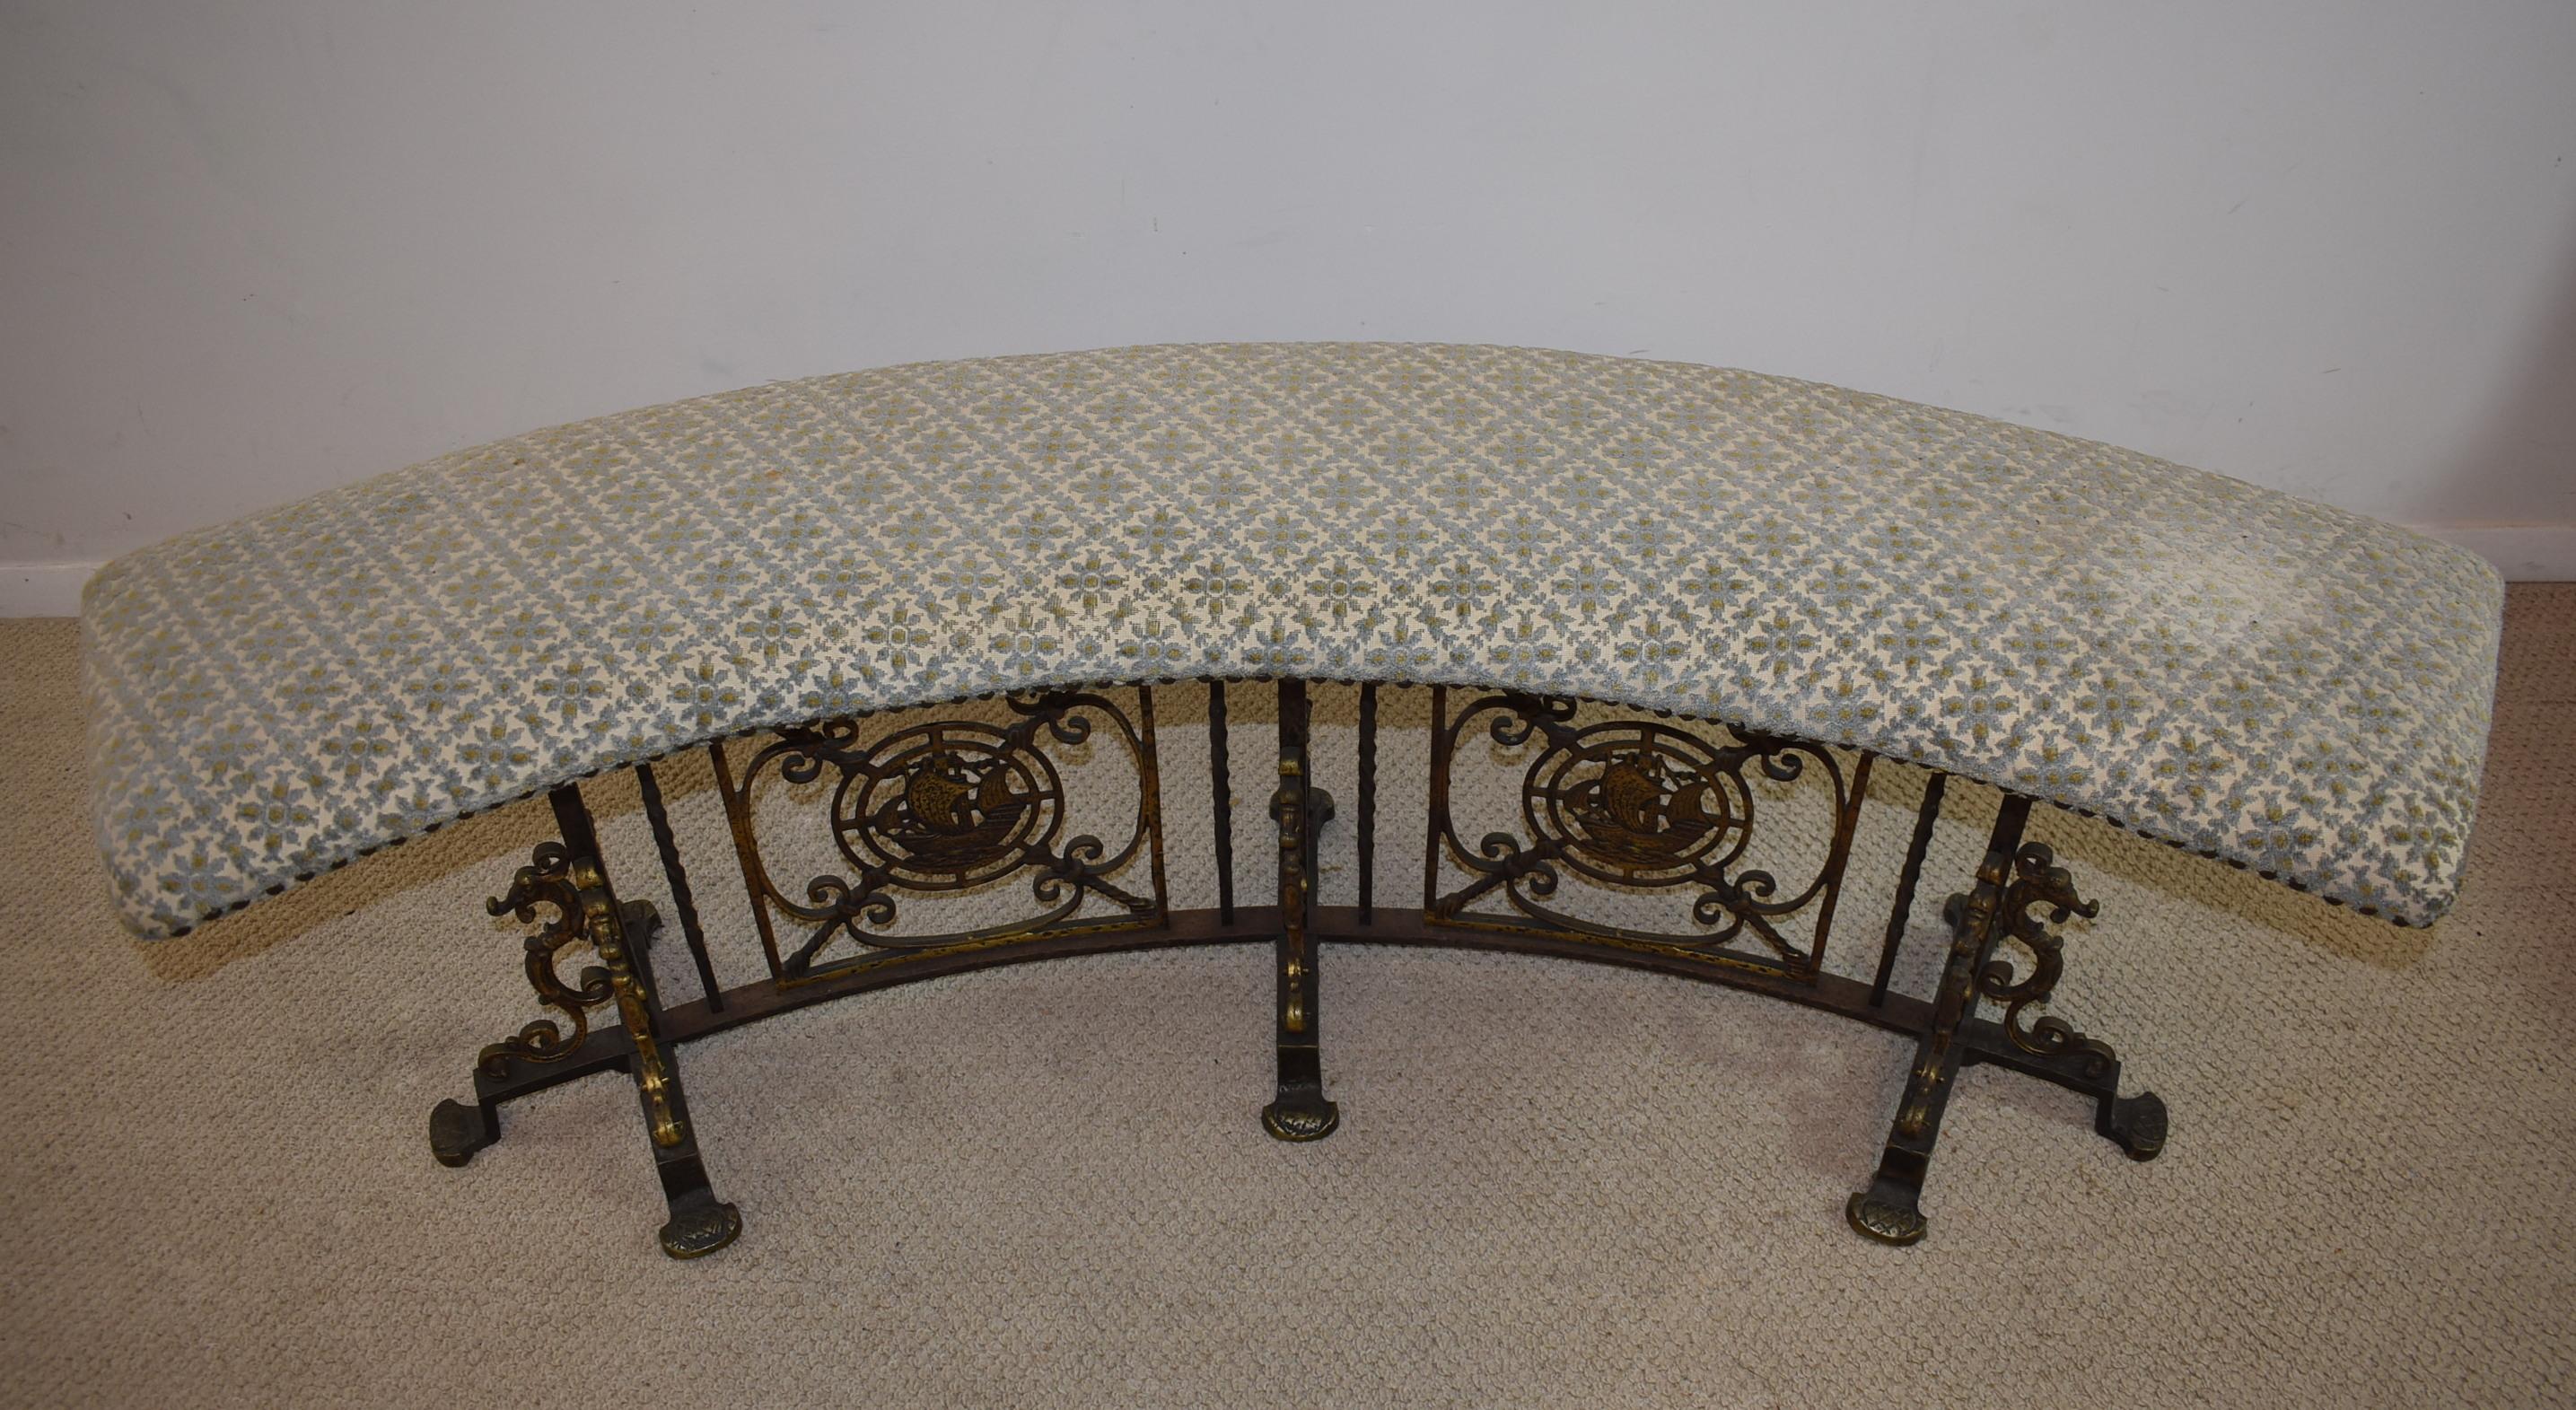 Unusual curved iron bench with upholstered seat and hammered finish. Brass ship and seahorse details. Original finish.